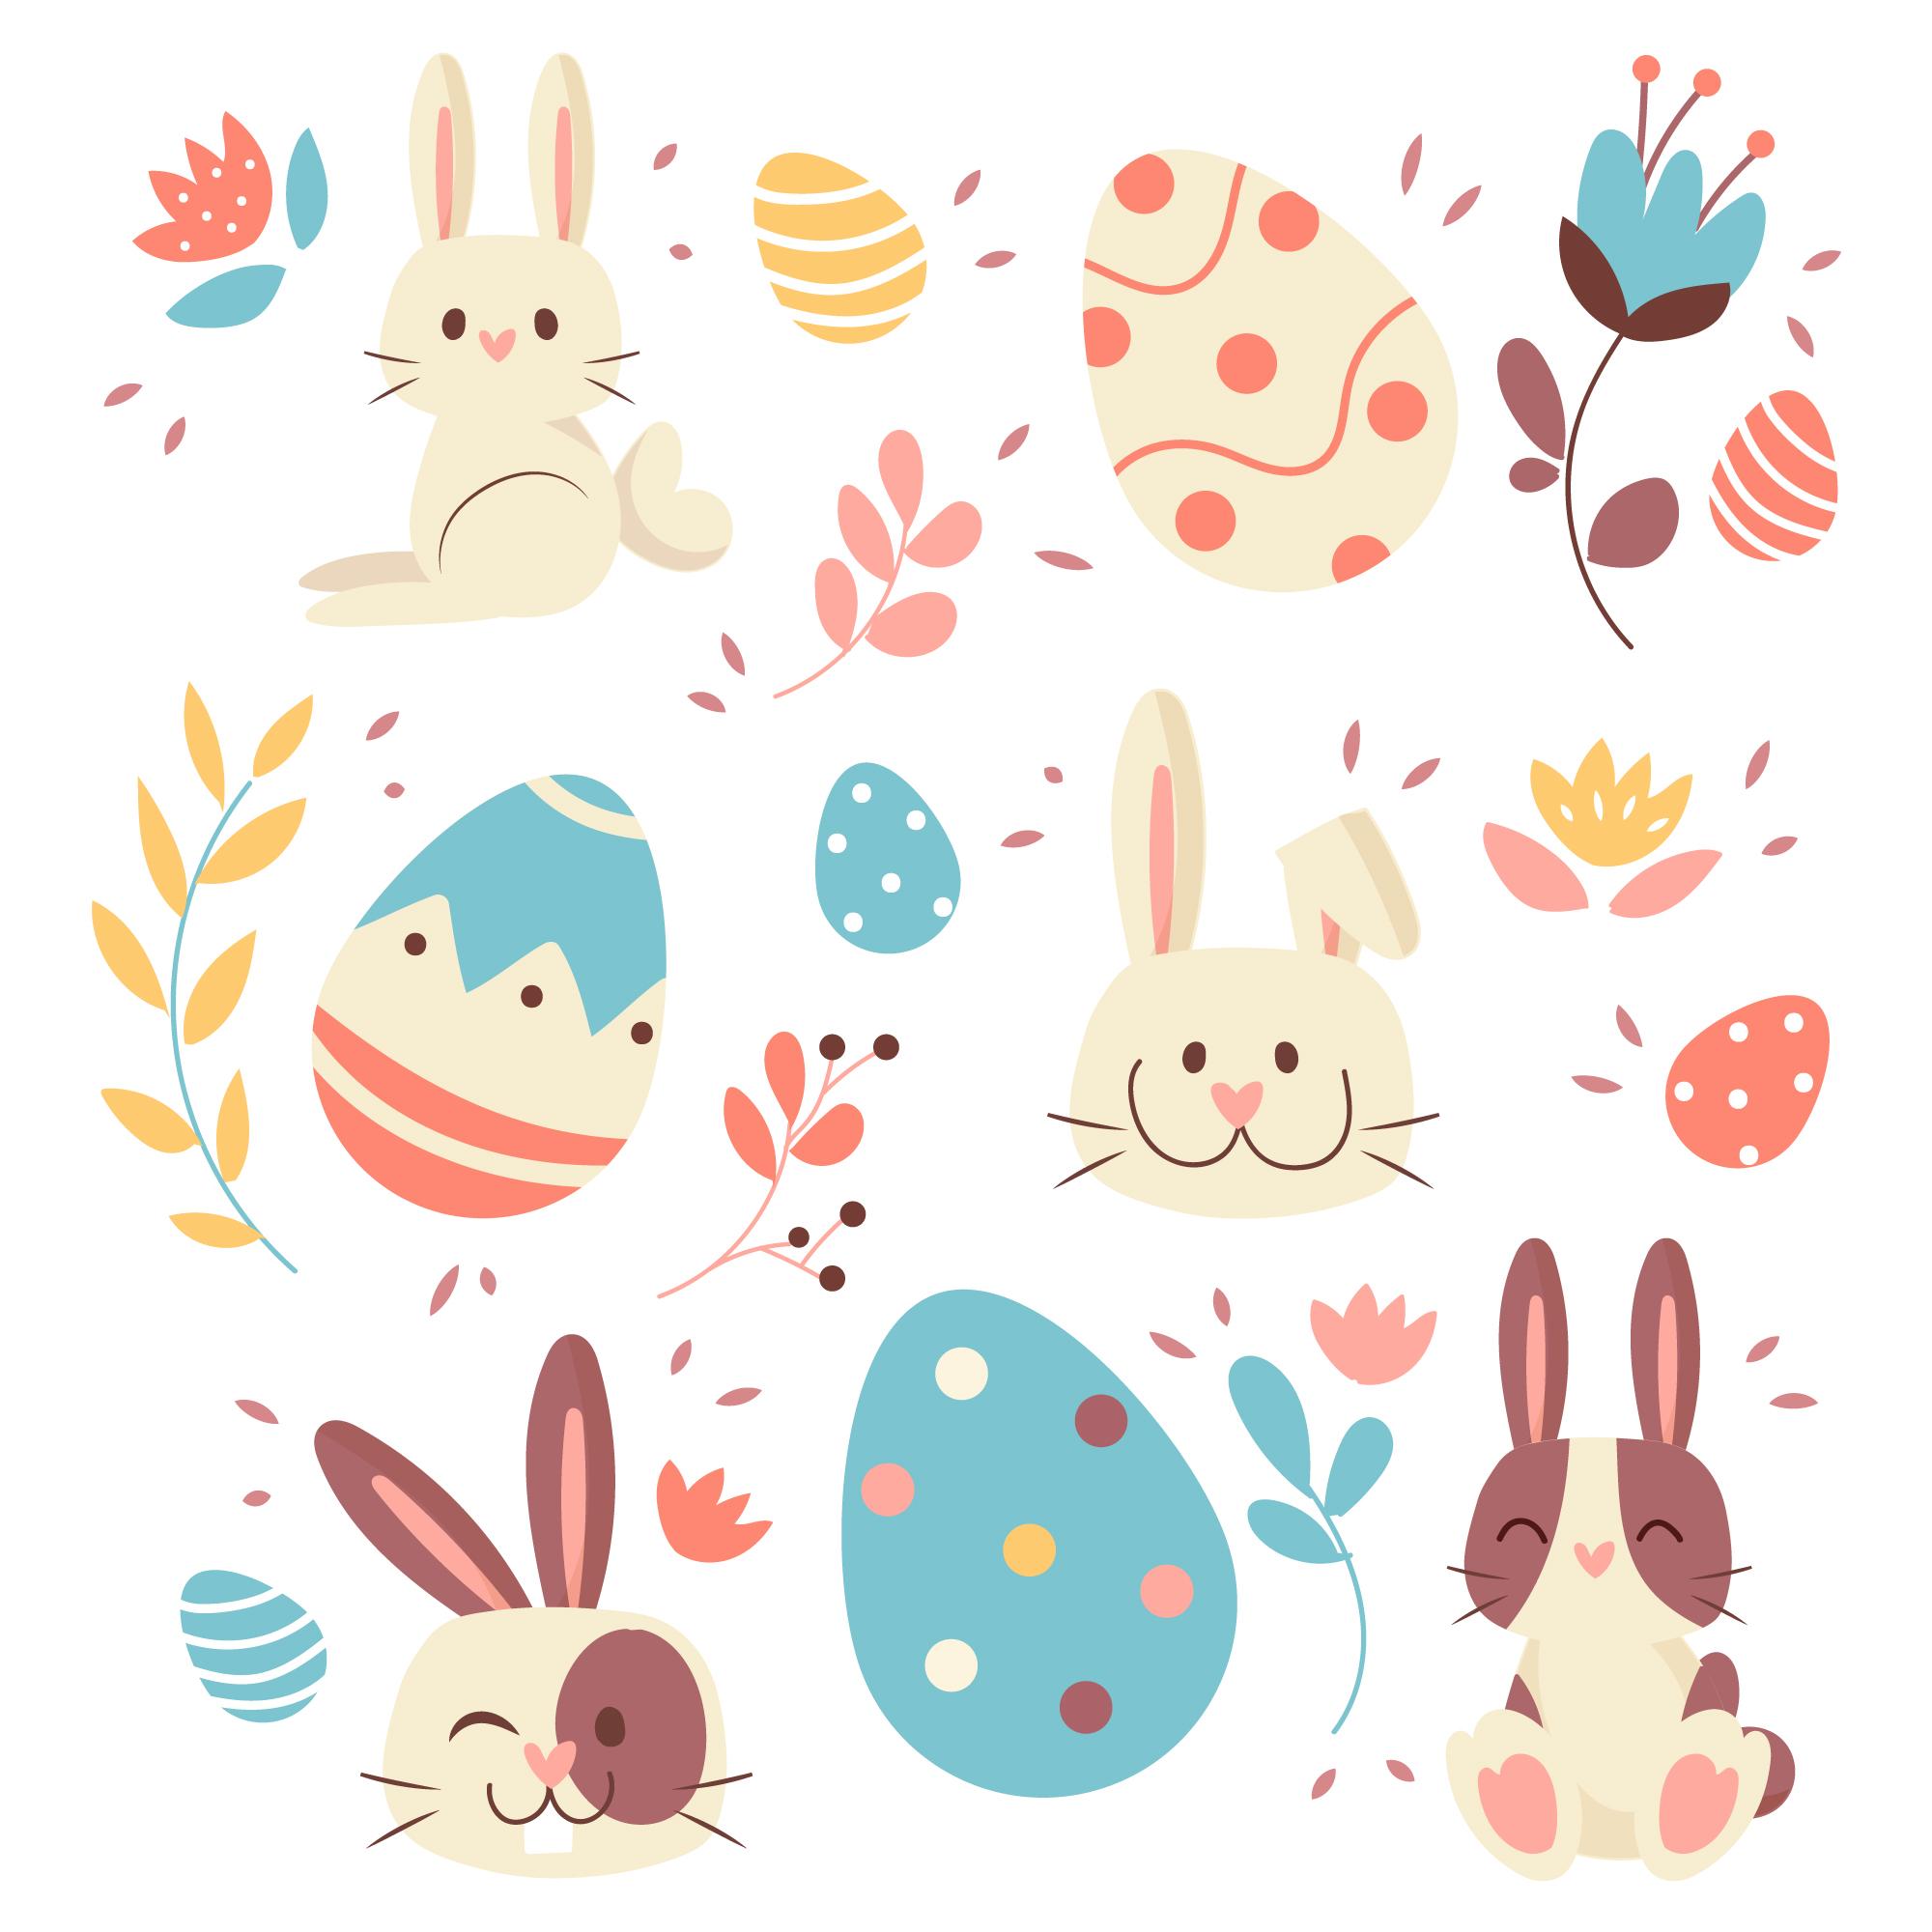 Free vector flat Easter element collection cover image.